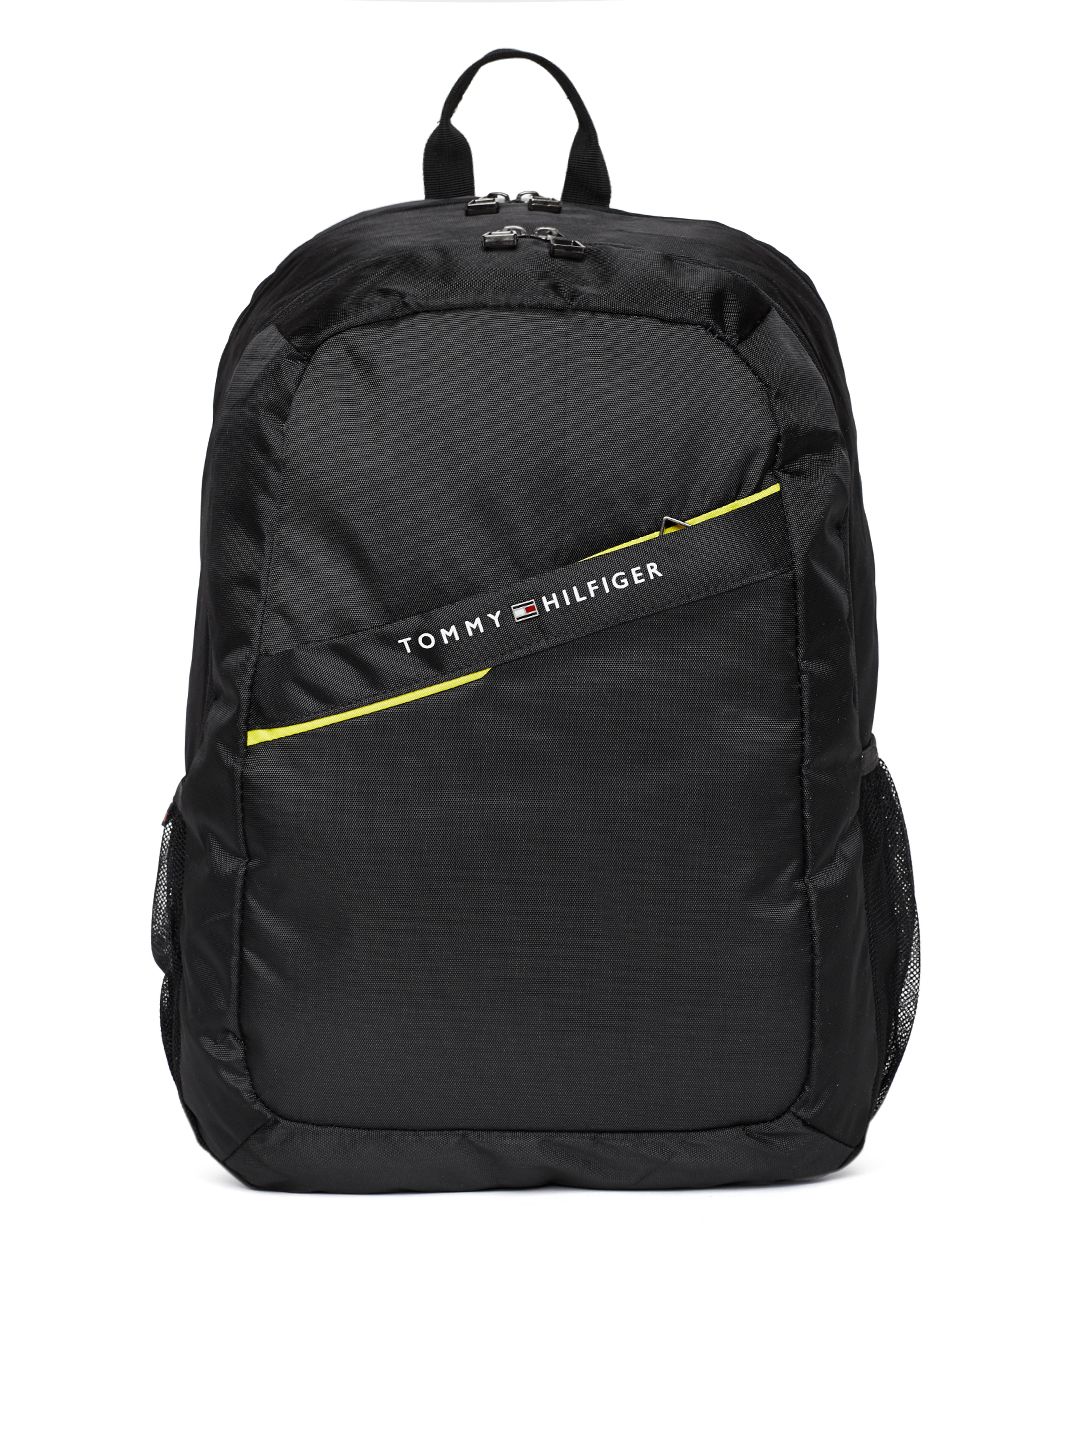 Tommy Hilfiger Unisex Black Solid Laptop Backpack Price in India